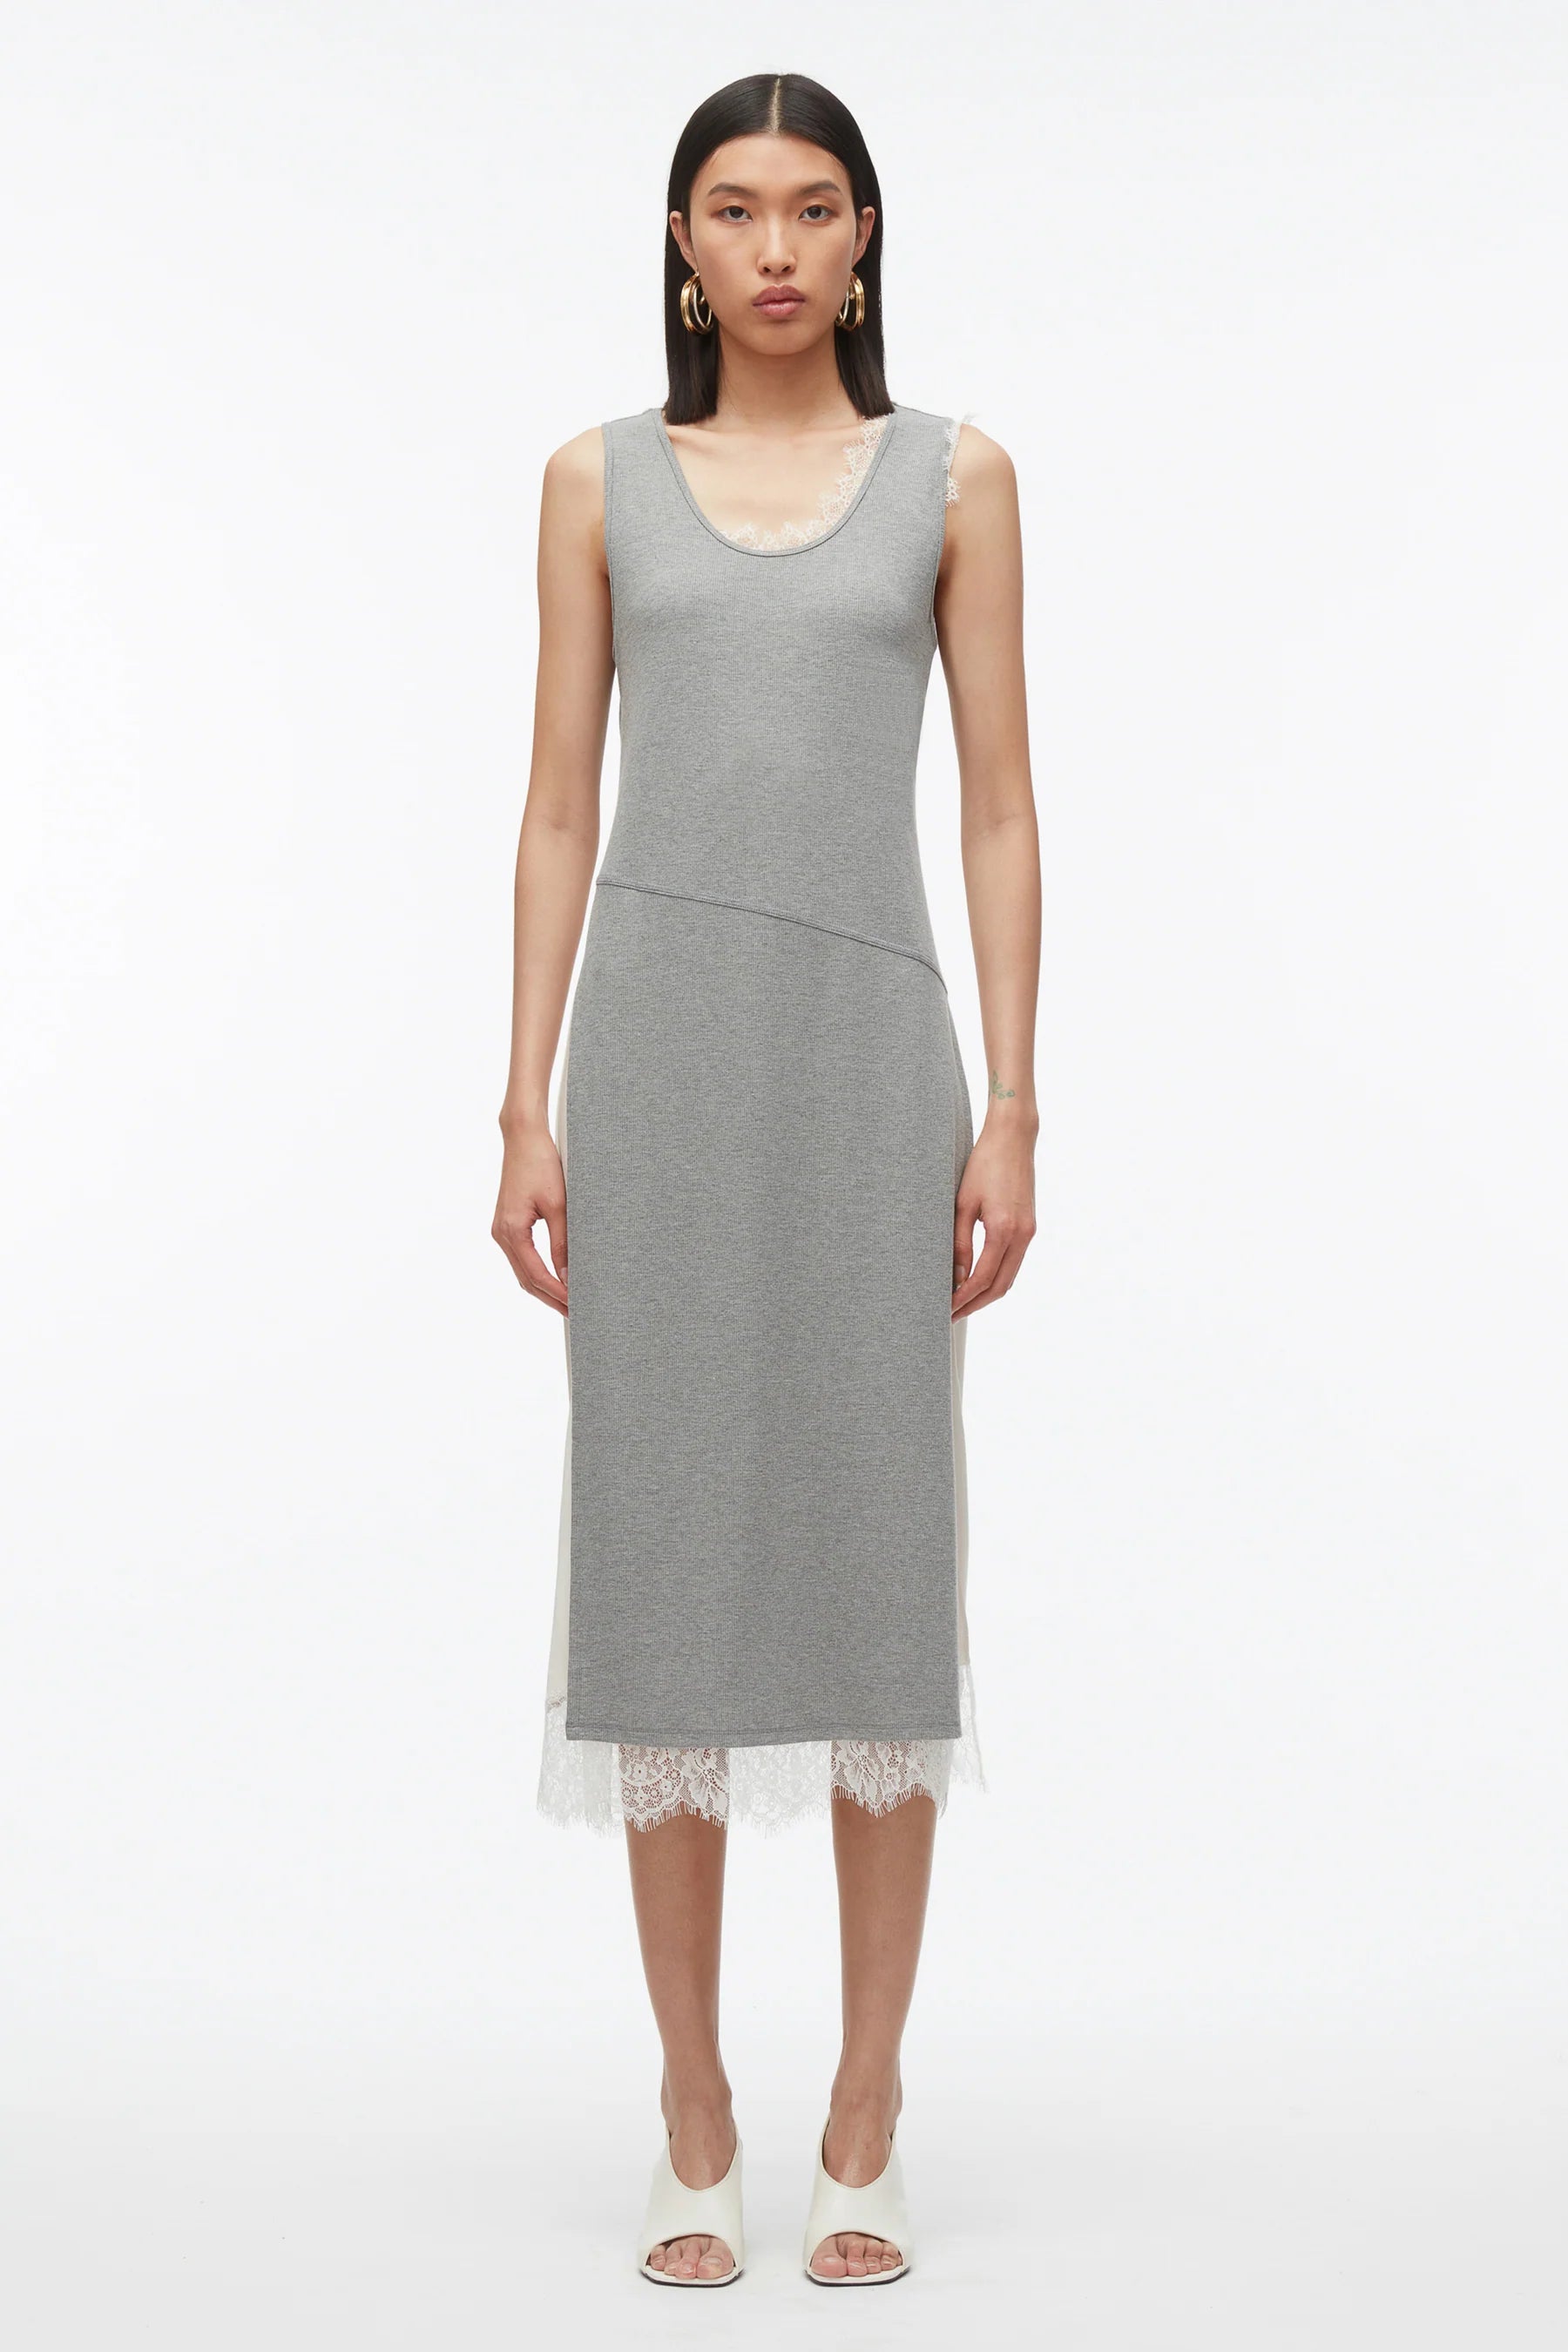 Deconstructed Tank Dress with Lace Trim